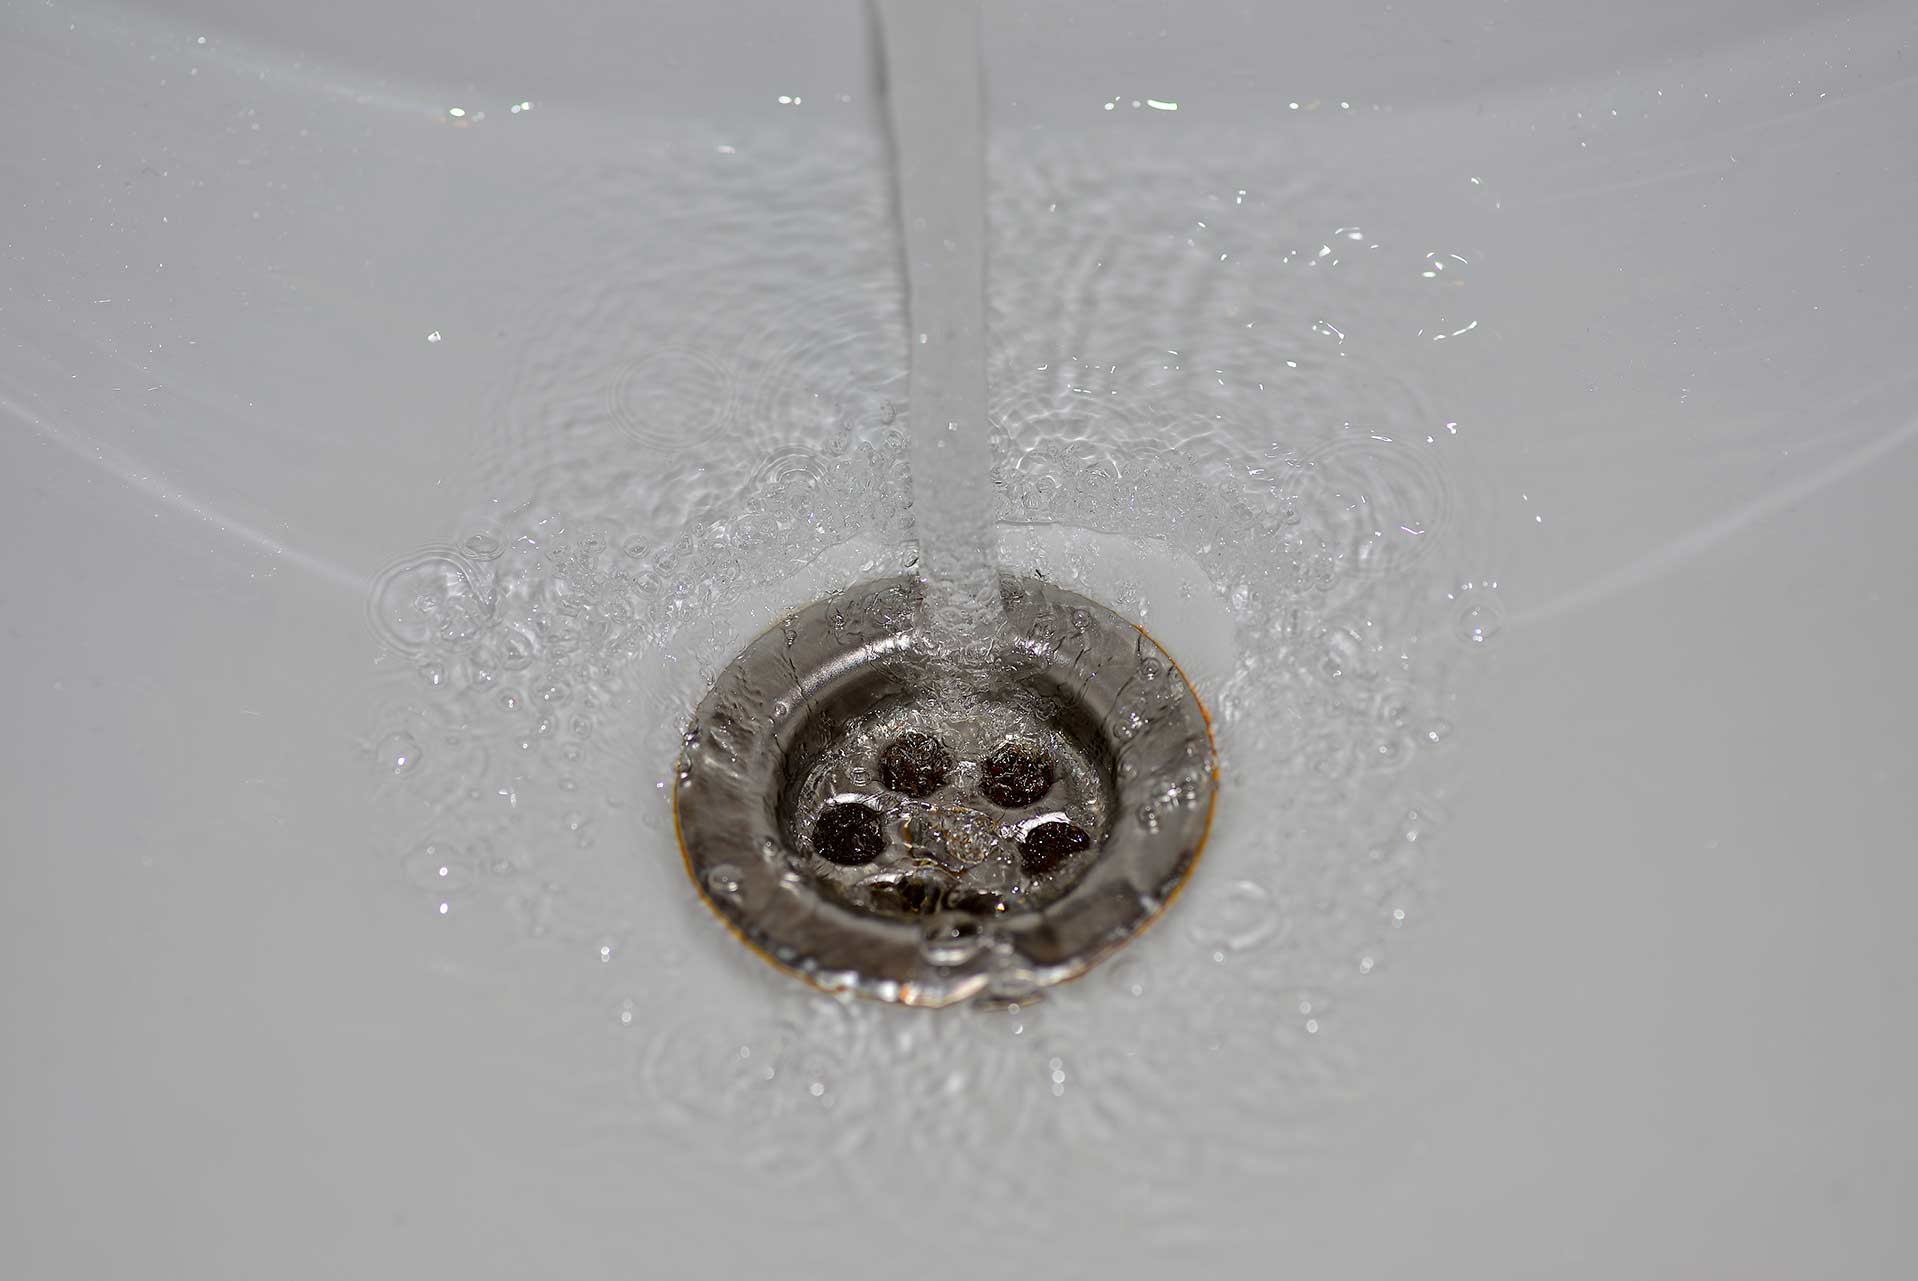 A2B Drains provides services to unblock blocked sinks and drains for properties in Redditch.